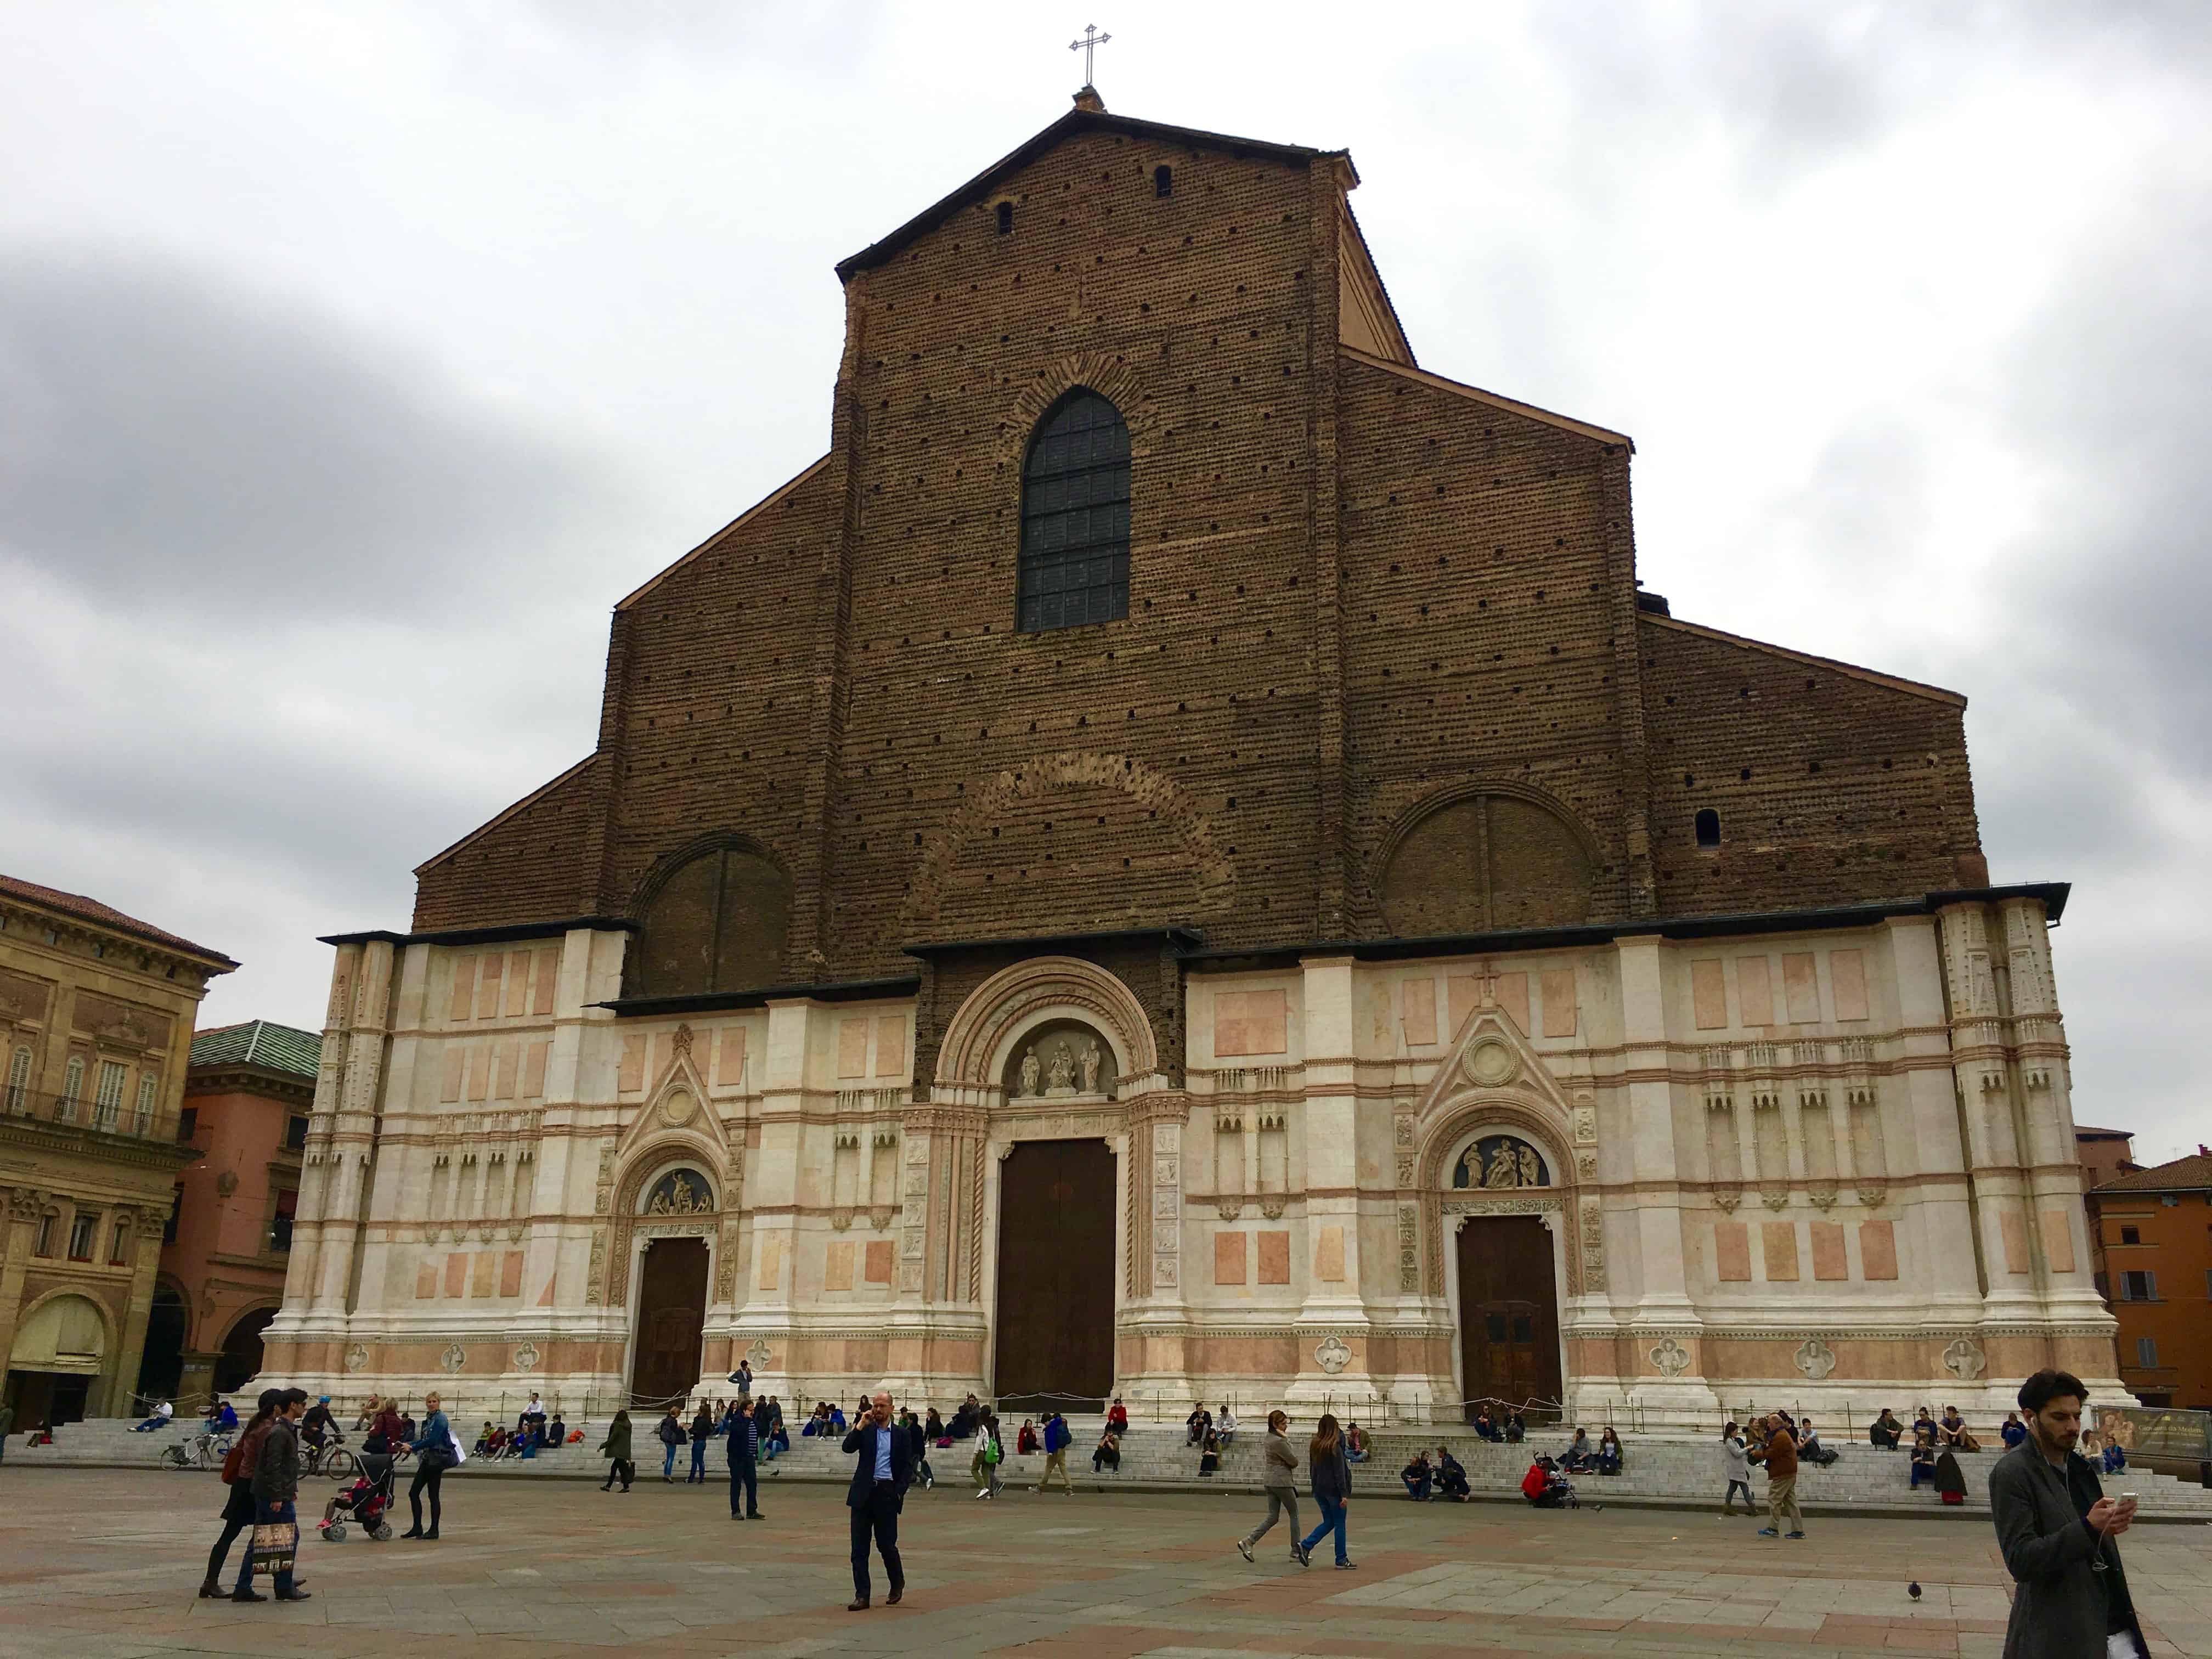 Unfinished facade of the Basilica di San Petronio, world's fifth largest church, Bologna, Italy.